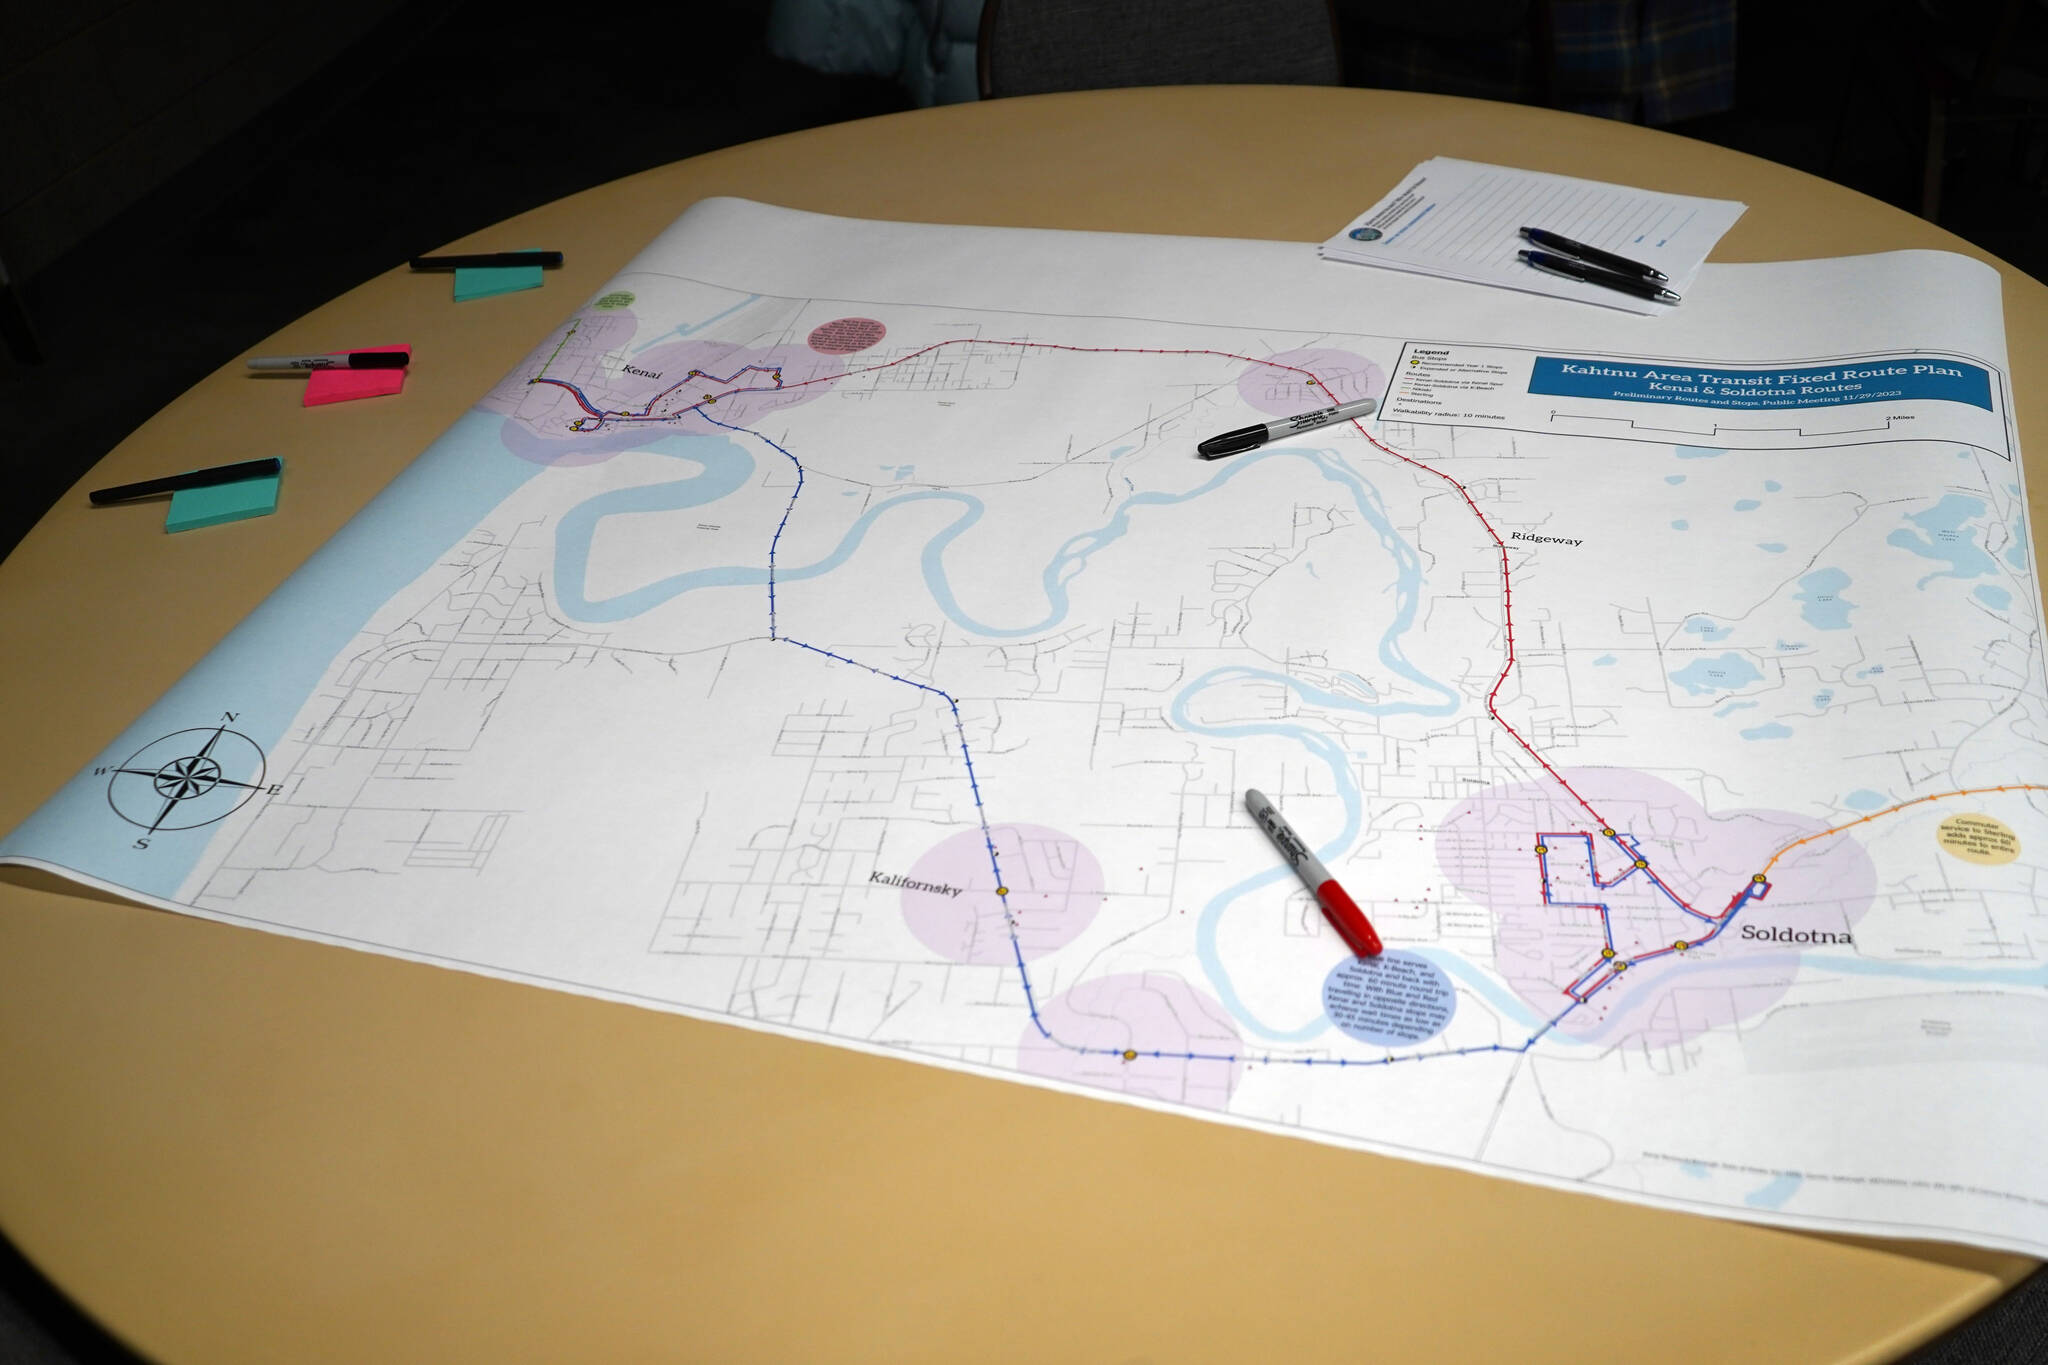 A preliminary Kenai and Soldotna route for the Kahtnu Area Transit sits ready for comment alongside markers and sticky notes at the Challenger Learning Center of Alaska in Kenai, Alaska, on Wednesday, Nov. 29, 2023. (Jake Dye/Peninsula Clarion)